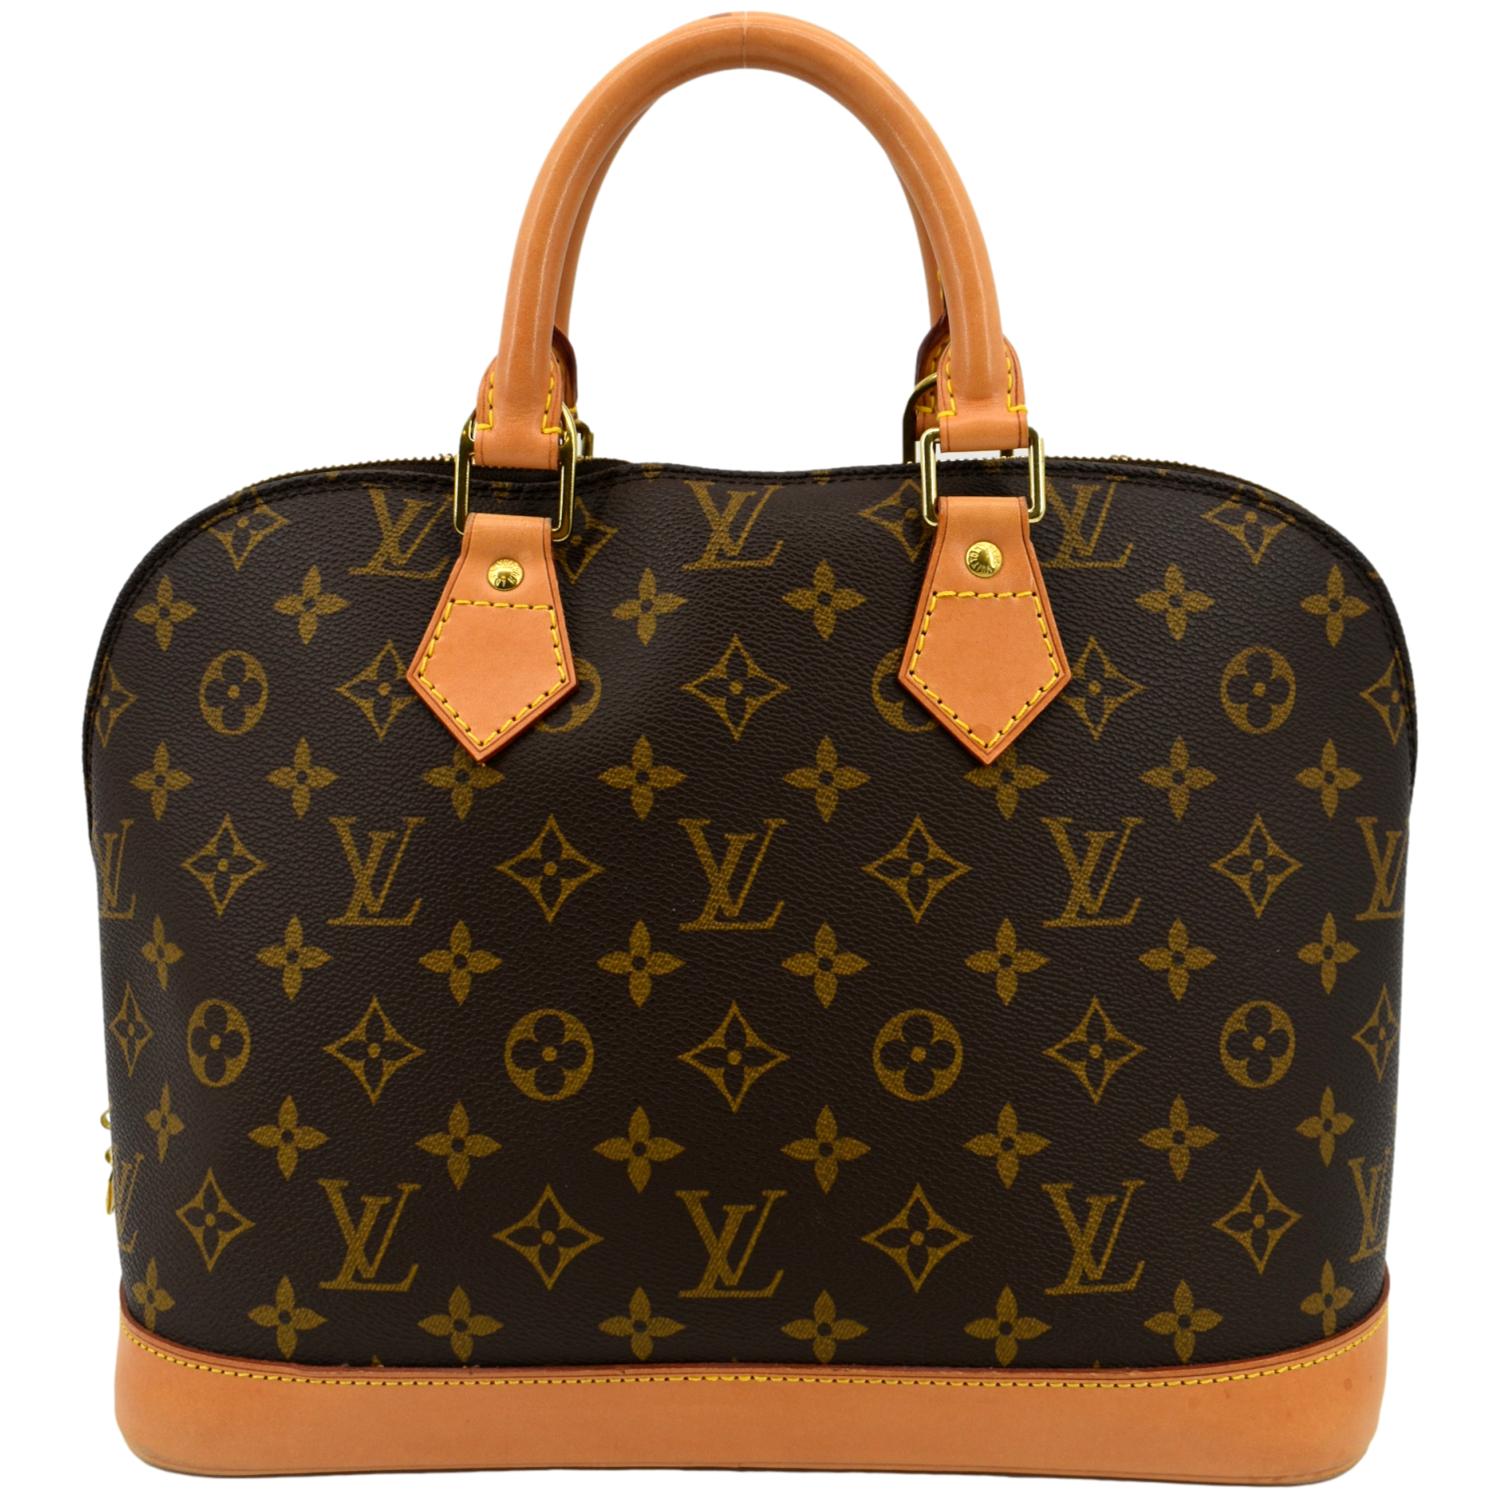 Is the Louis Vuitton Alma a classic bag? - Questions & Answers